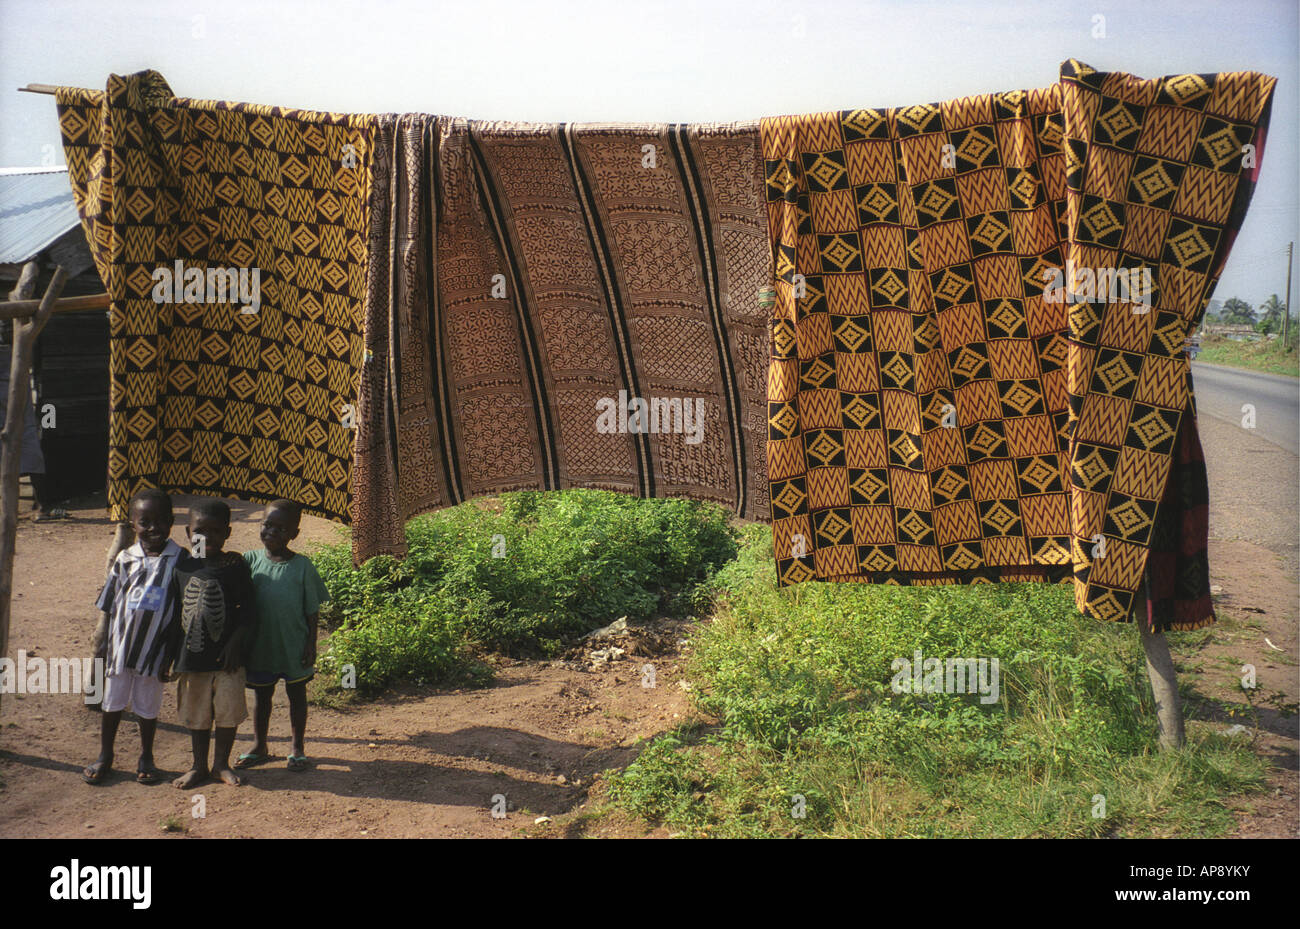 Three large batik cloths or Adrinkas hung out to dry Ashanti region of Ghana West Africa Stock Photo